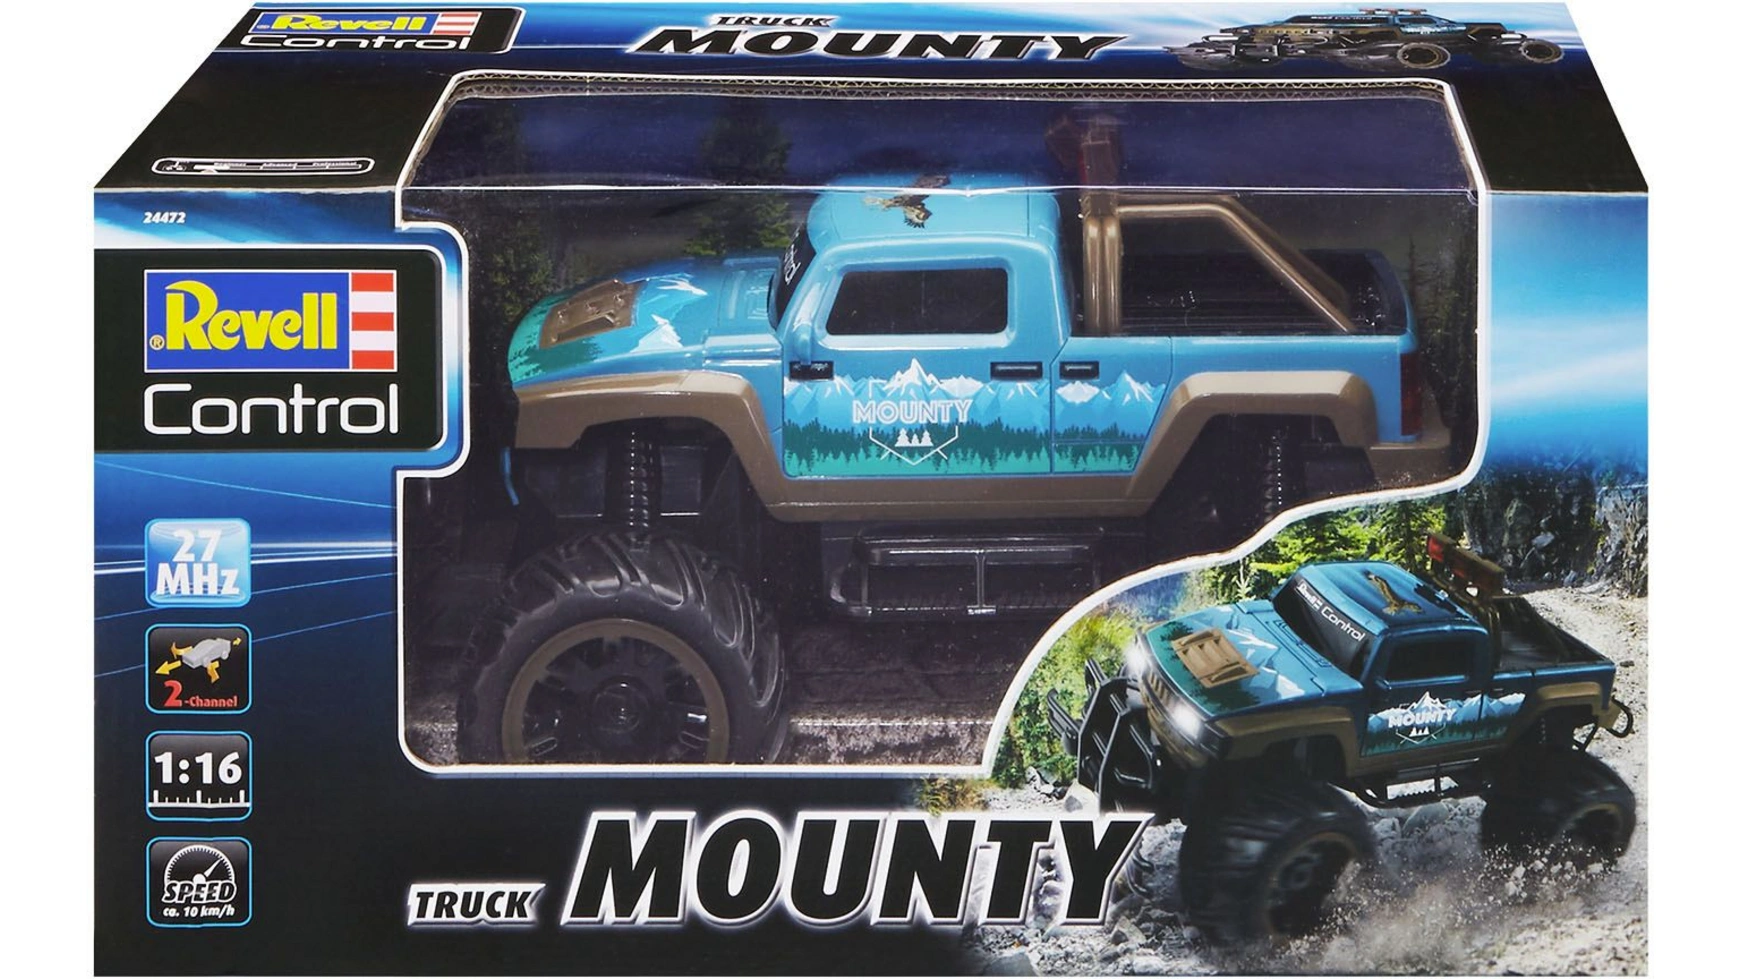 Revell Control RC Truck MOUNTY x 03 x 04 1 10 scale 2 4ghz 4wd high speed rc bigfoot big wheels off road rock race truck electric rc remote control car